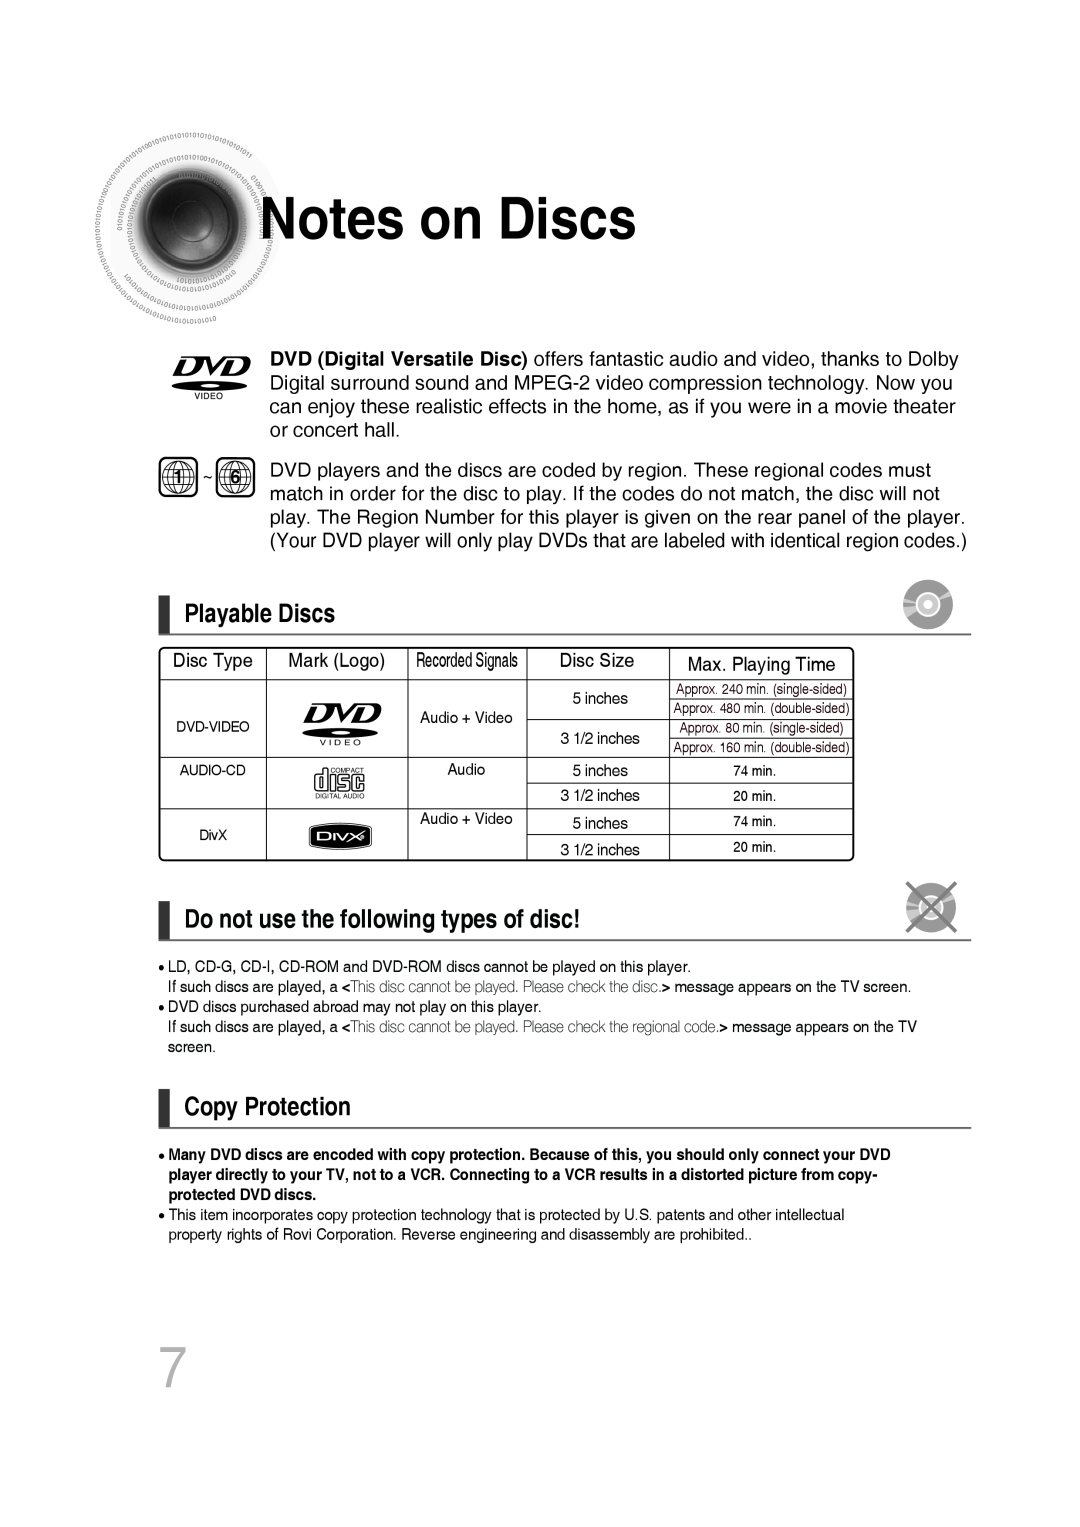 Samsung MM-C530D manual Notes on Discs, Playable Discs, Do not use the following types of disc, Copy Protection, Disc Type 